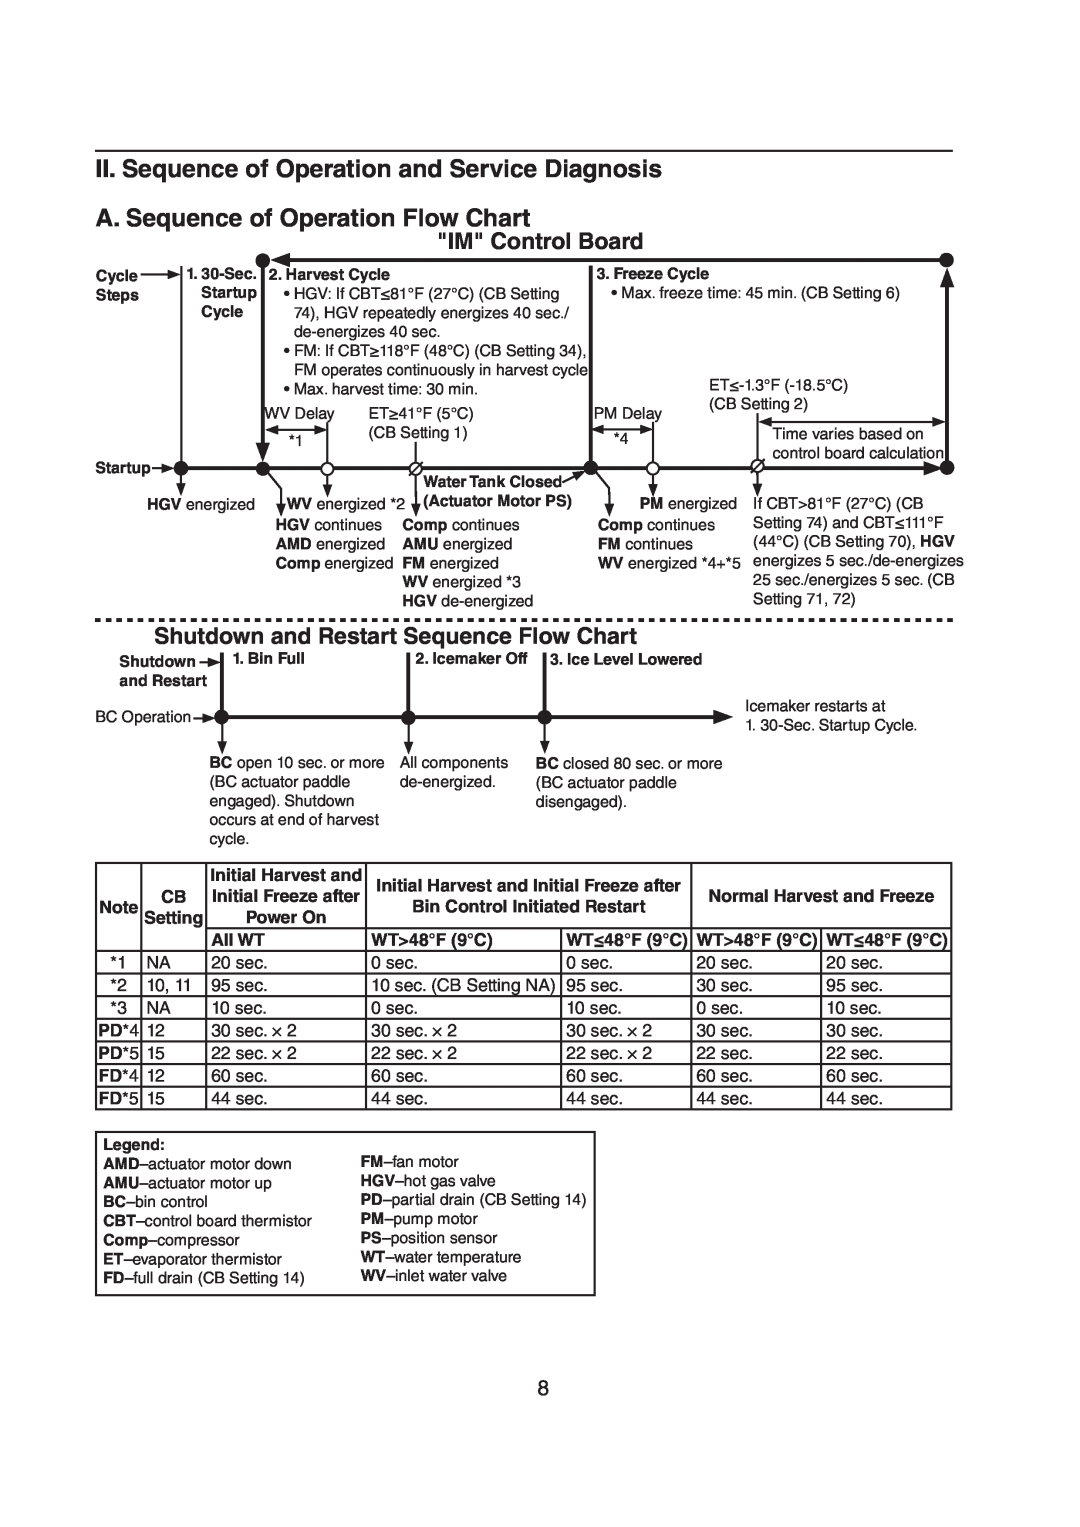 Hoshizaki M029-897 II. Sequence of Operation and Service Diagnosis, A. Sequence of Operation Flow Chart, IM Control Board 